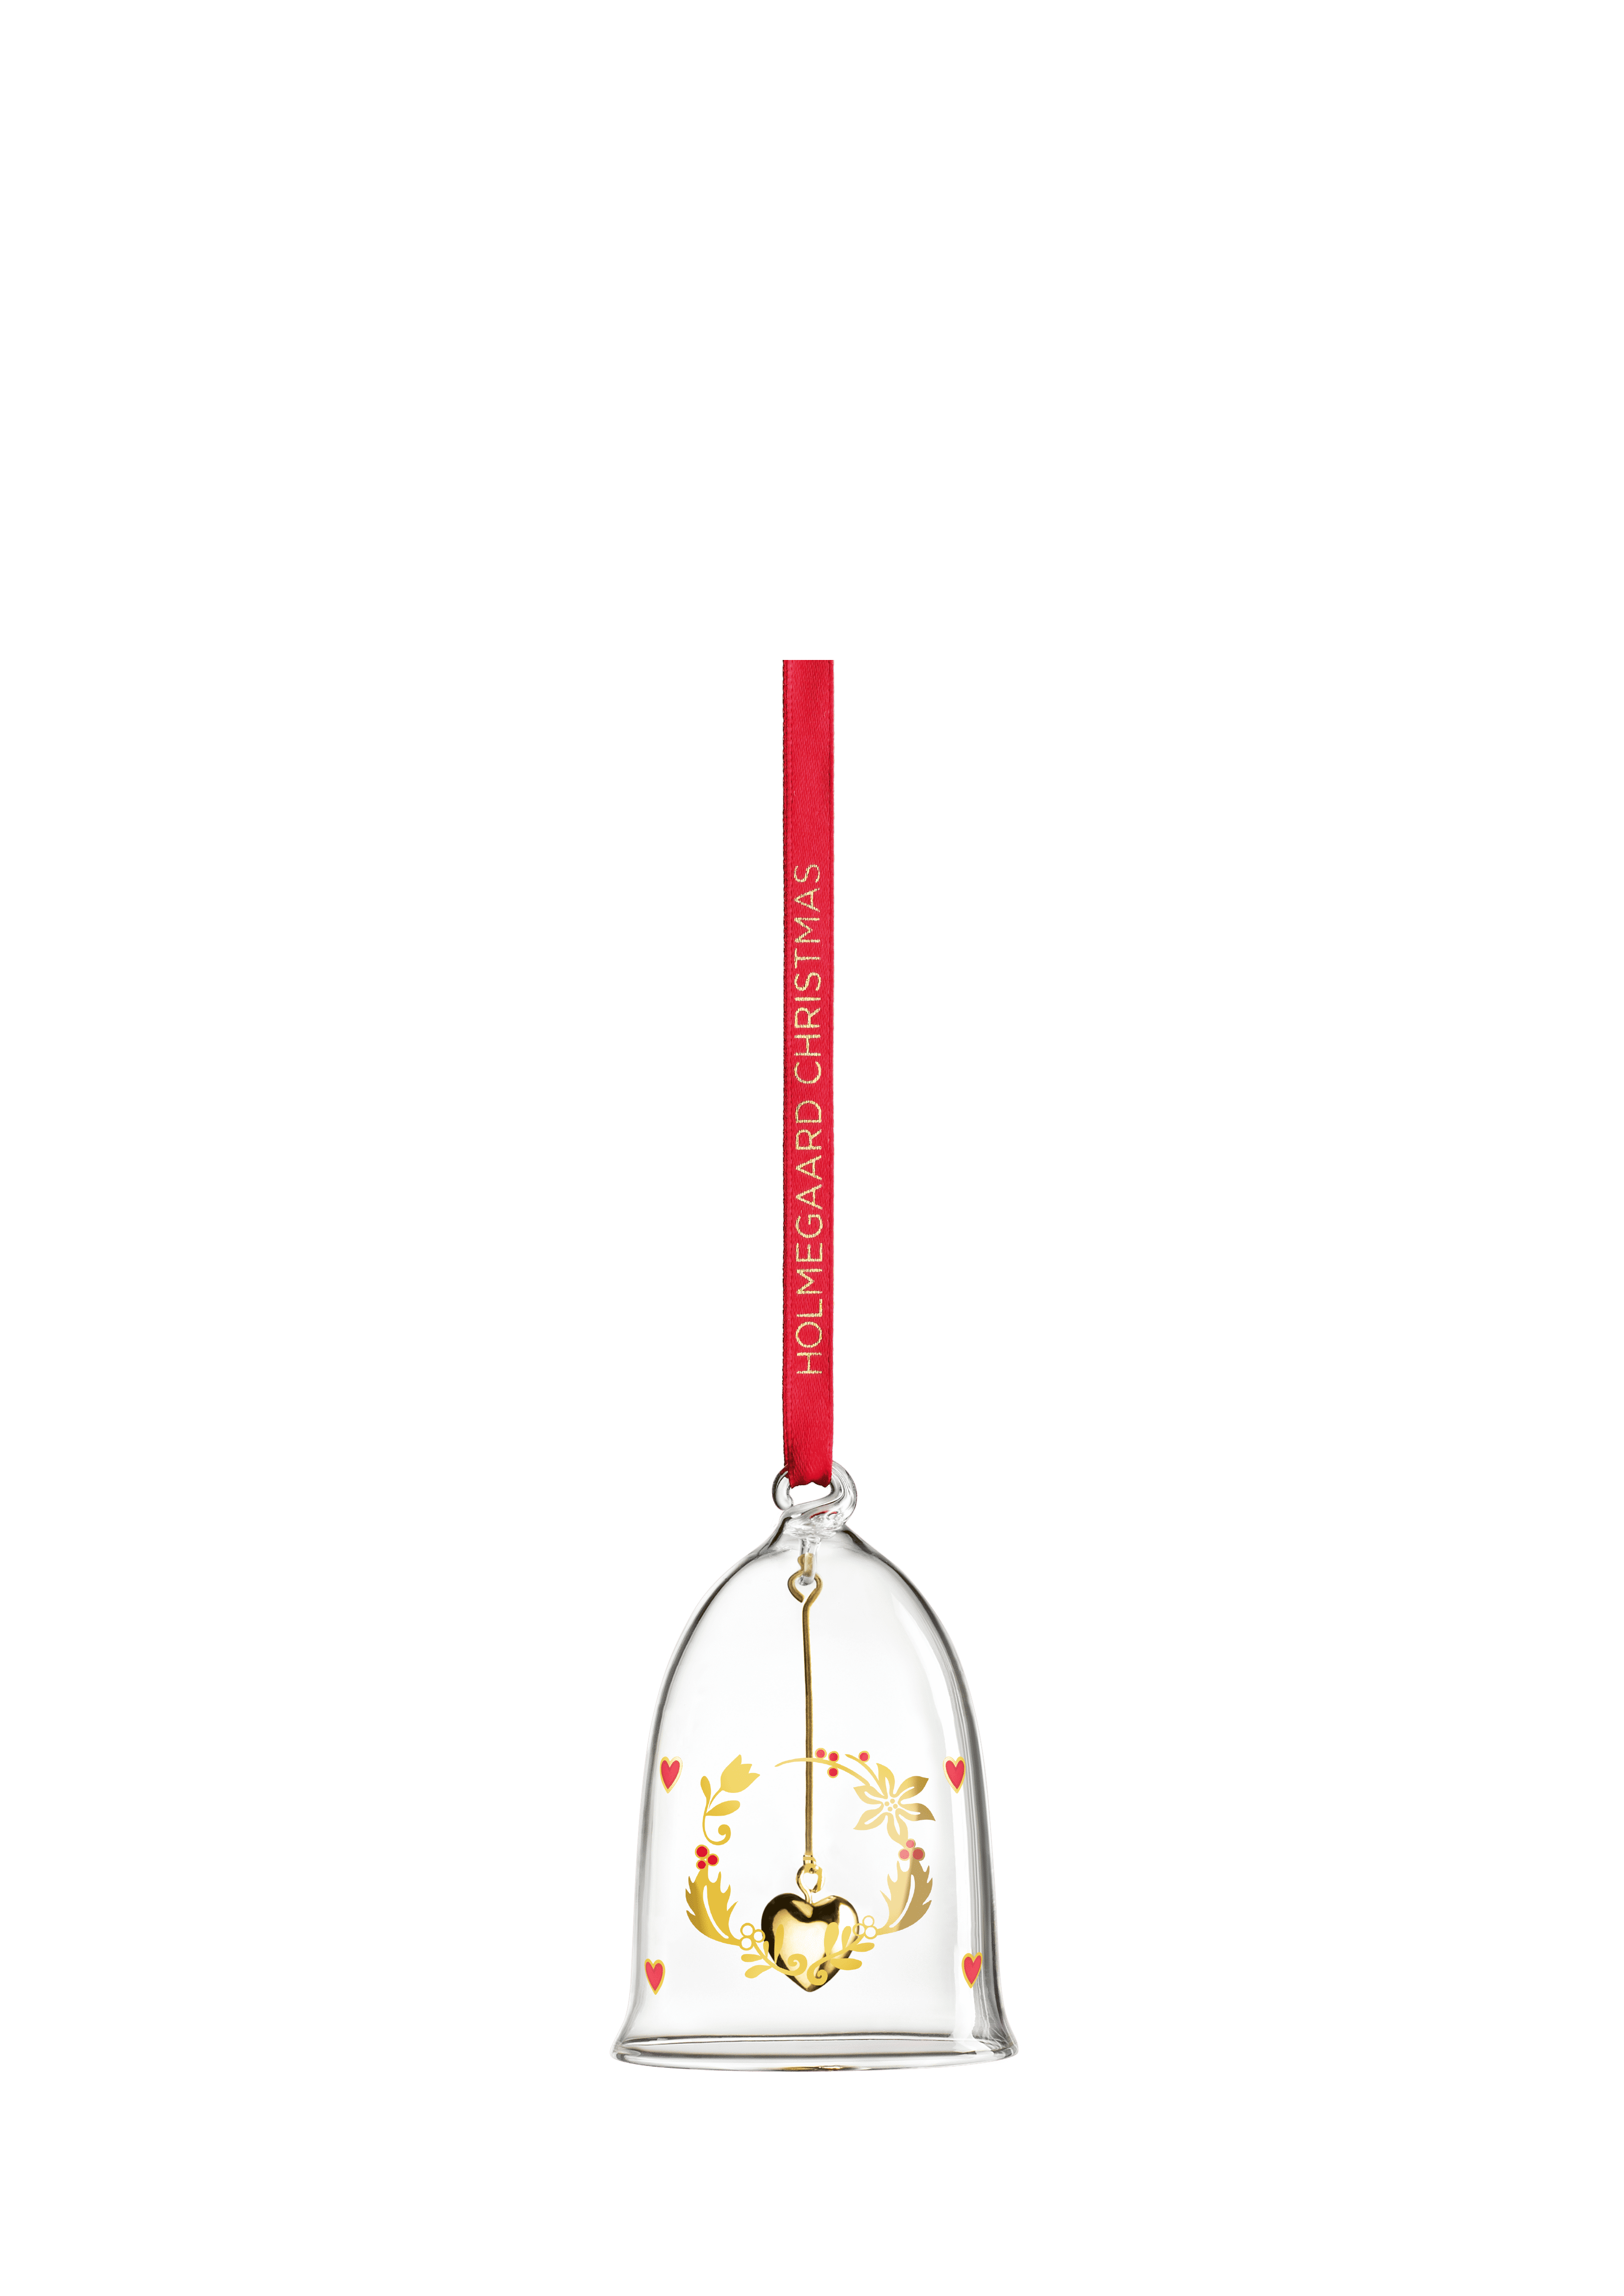 Annual Christmas Bell small